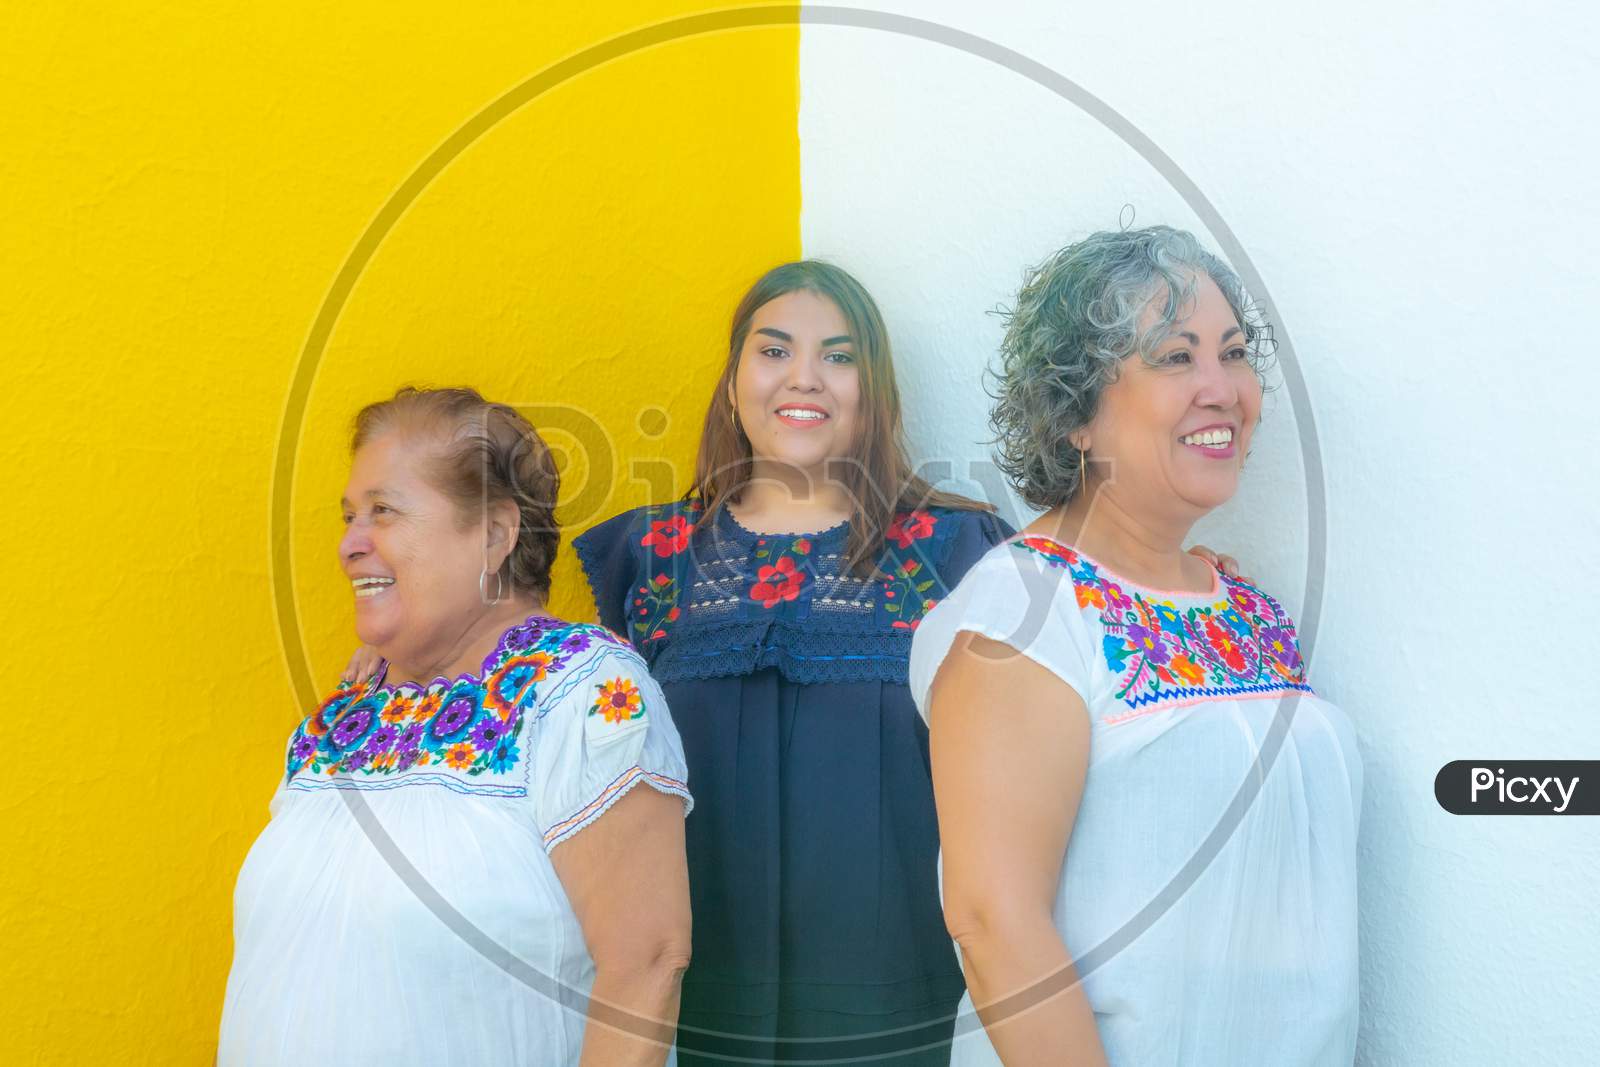 Granddaughter Between Mother And Grandmother Very Cheerful, Three Generations Of Mexican Women Smiling With Floral Print Blouses On A White And Yellow Background